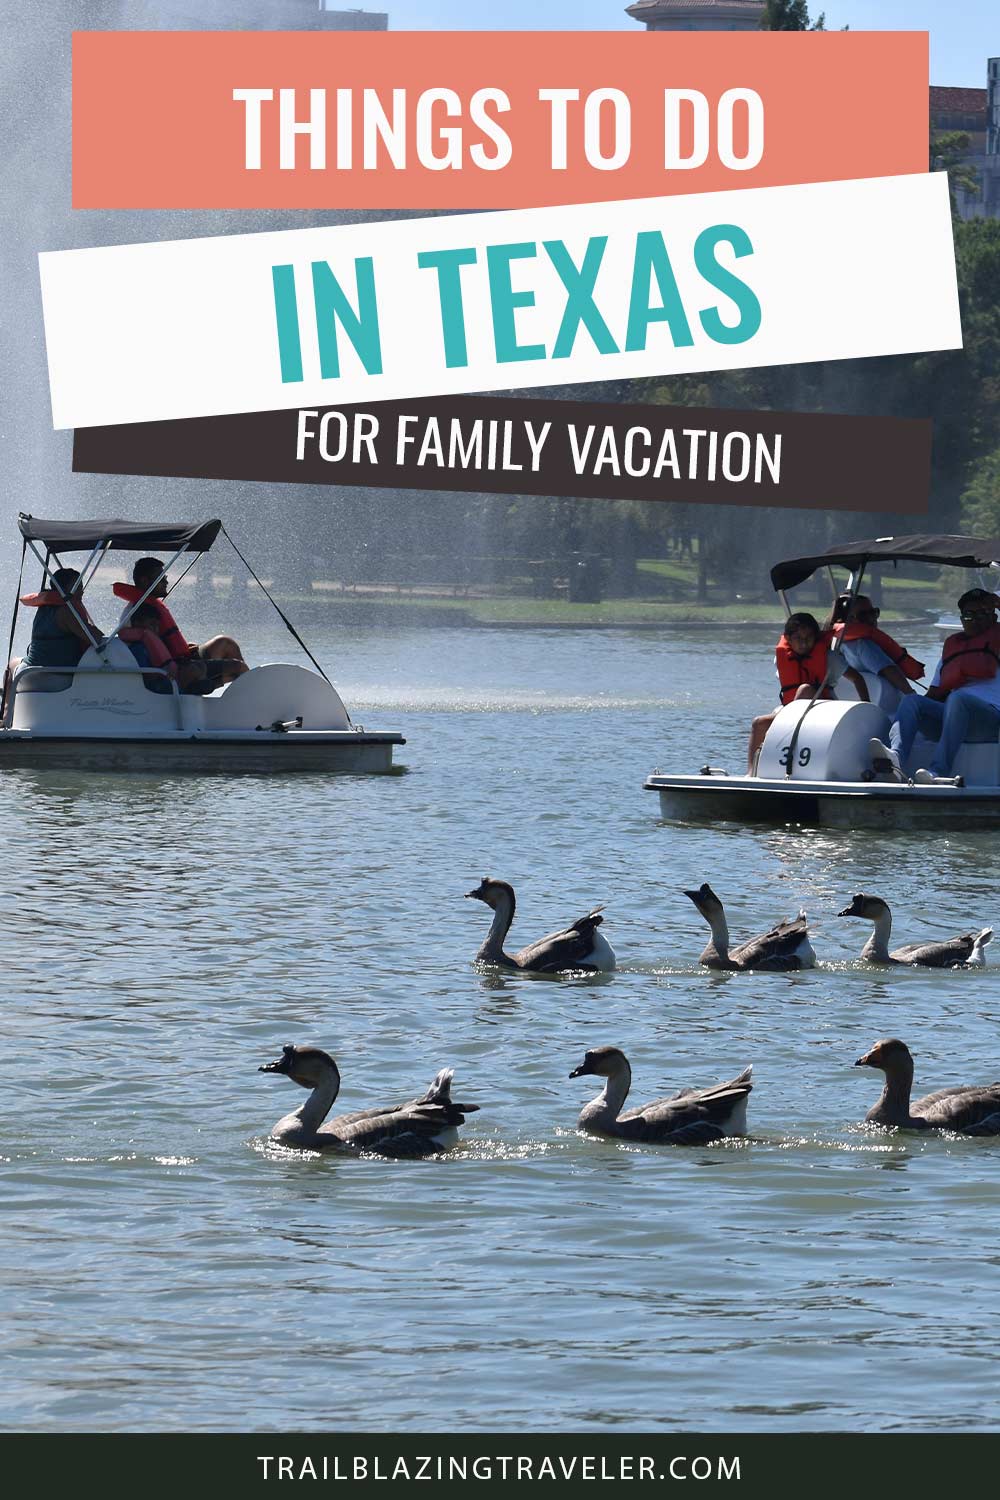 Some ducks and people on boats on a lake - Things To Do In Texas For Family Vacation.